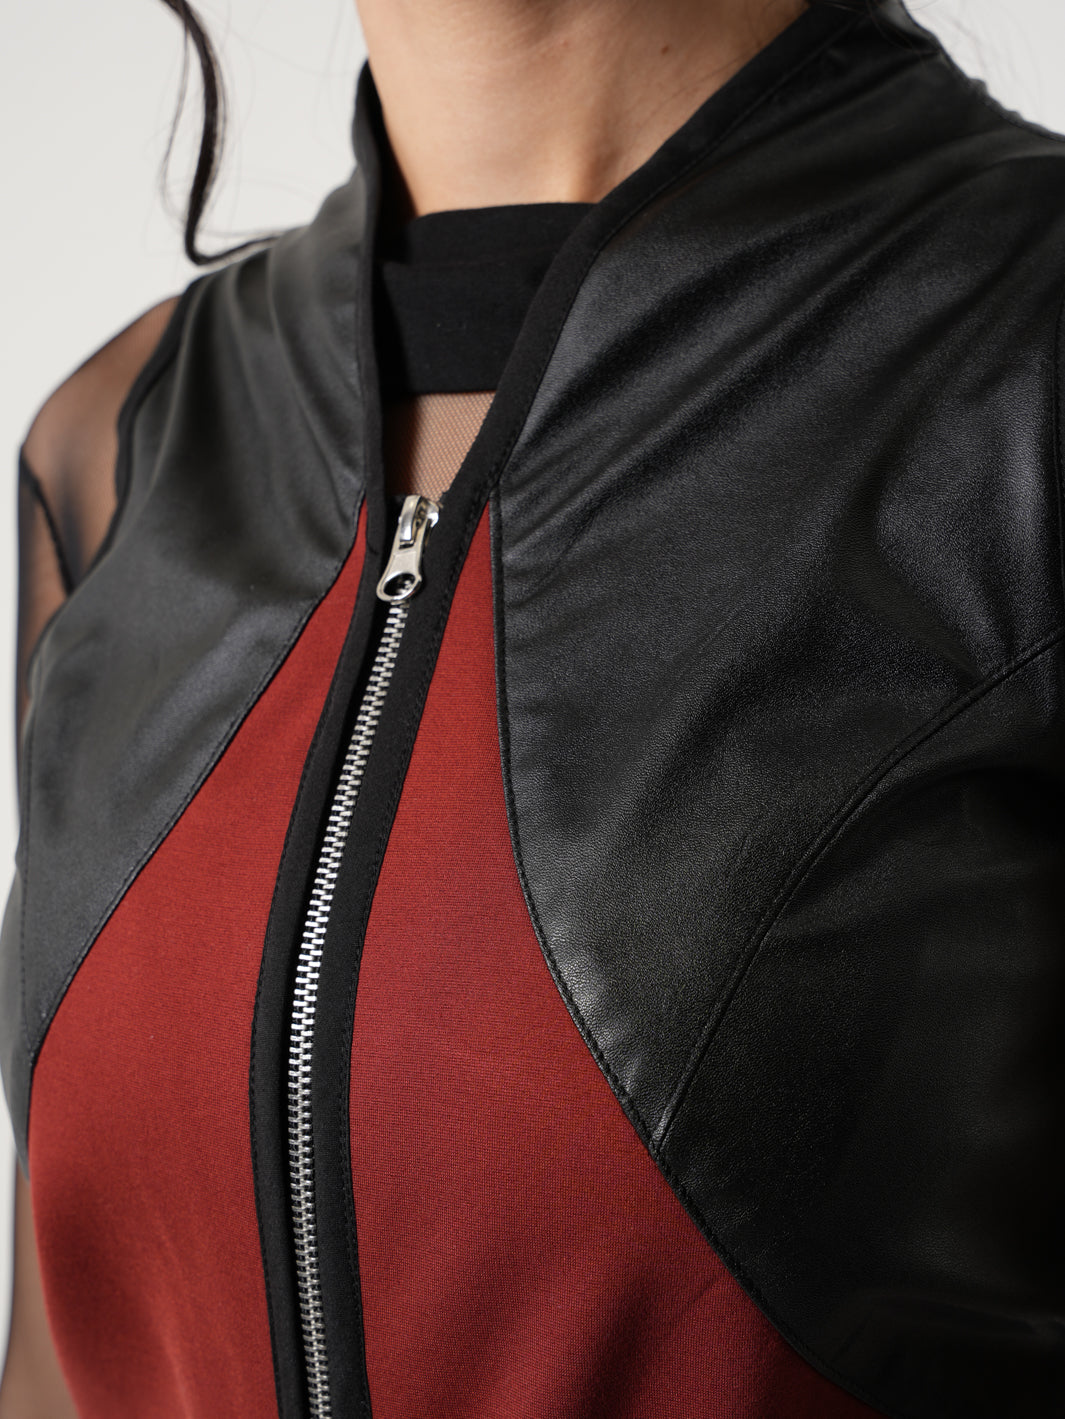 Sleeveless Long Vest With Leather Accent